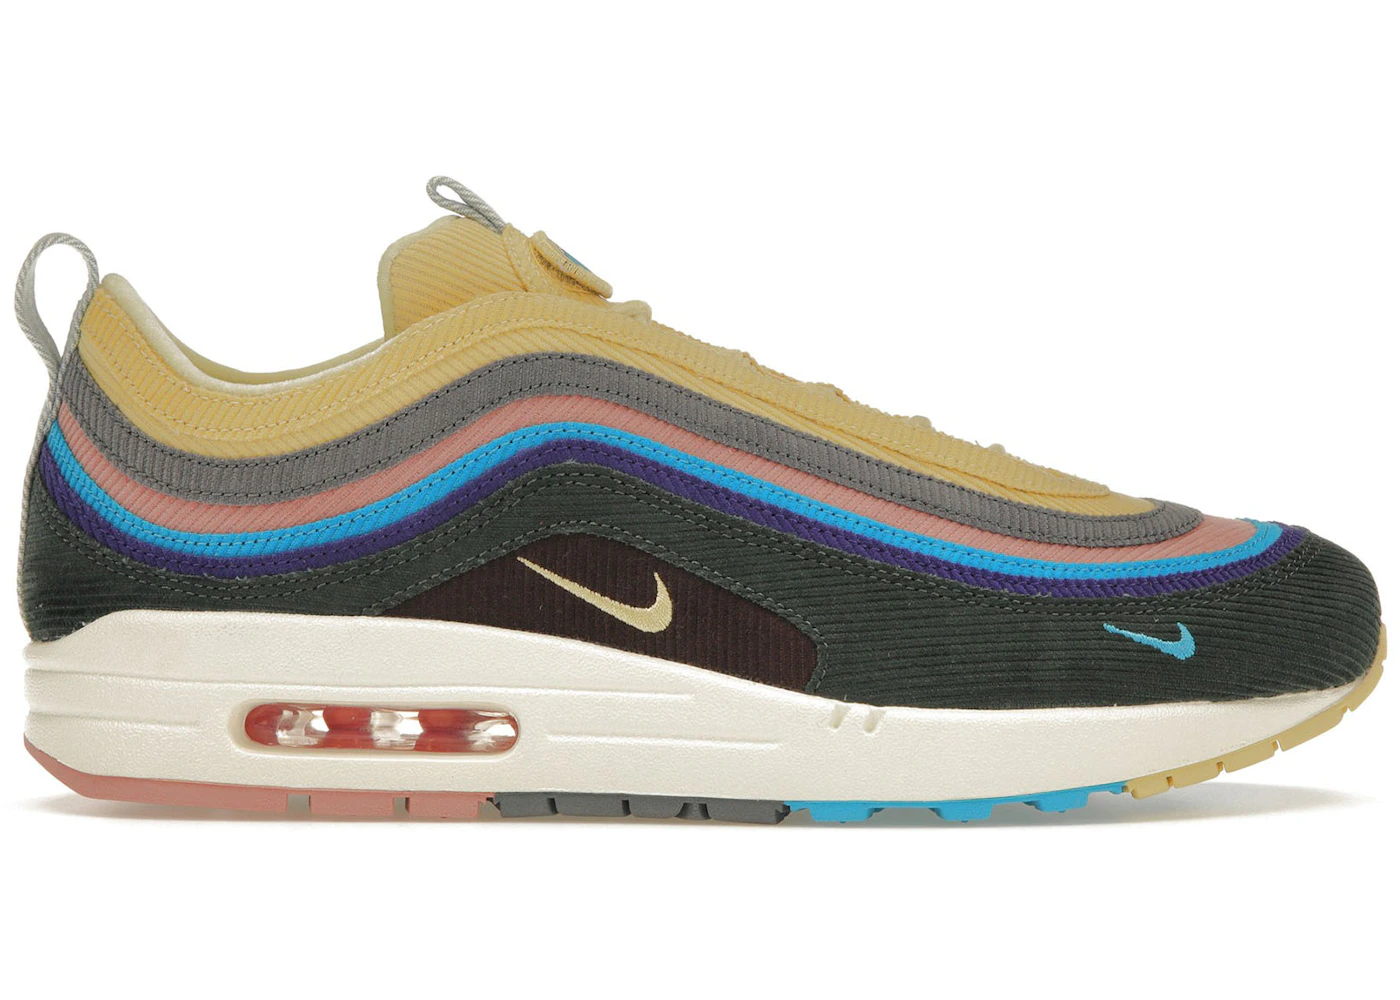 Framework Actively underwear Nike Air Max 1/97 Sean Wotherspoon (Extra Lace Set Only) - AJ4219-400 - US